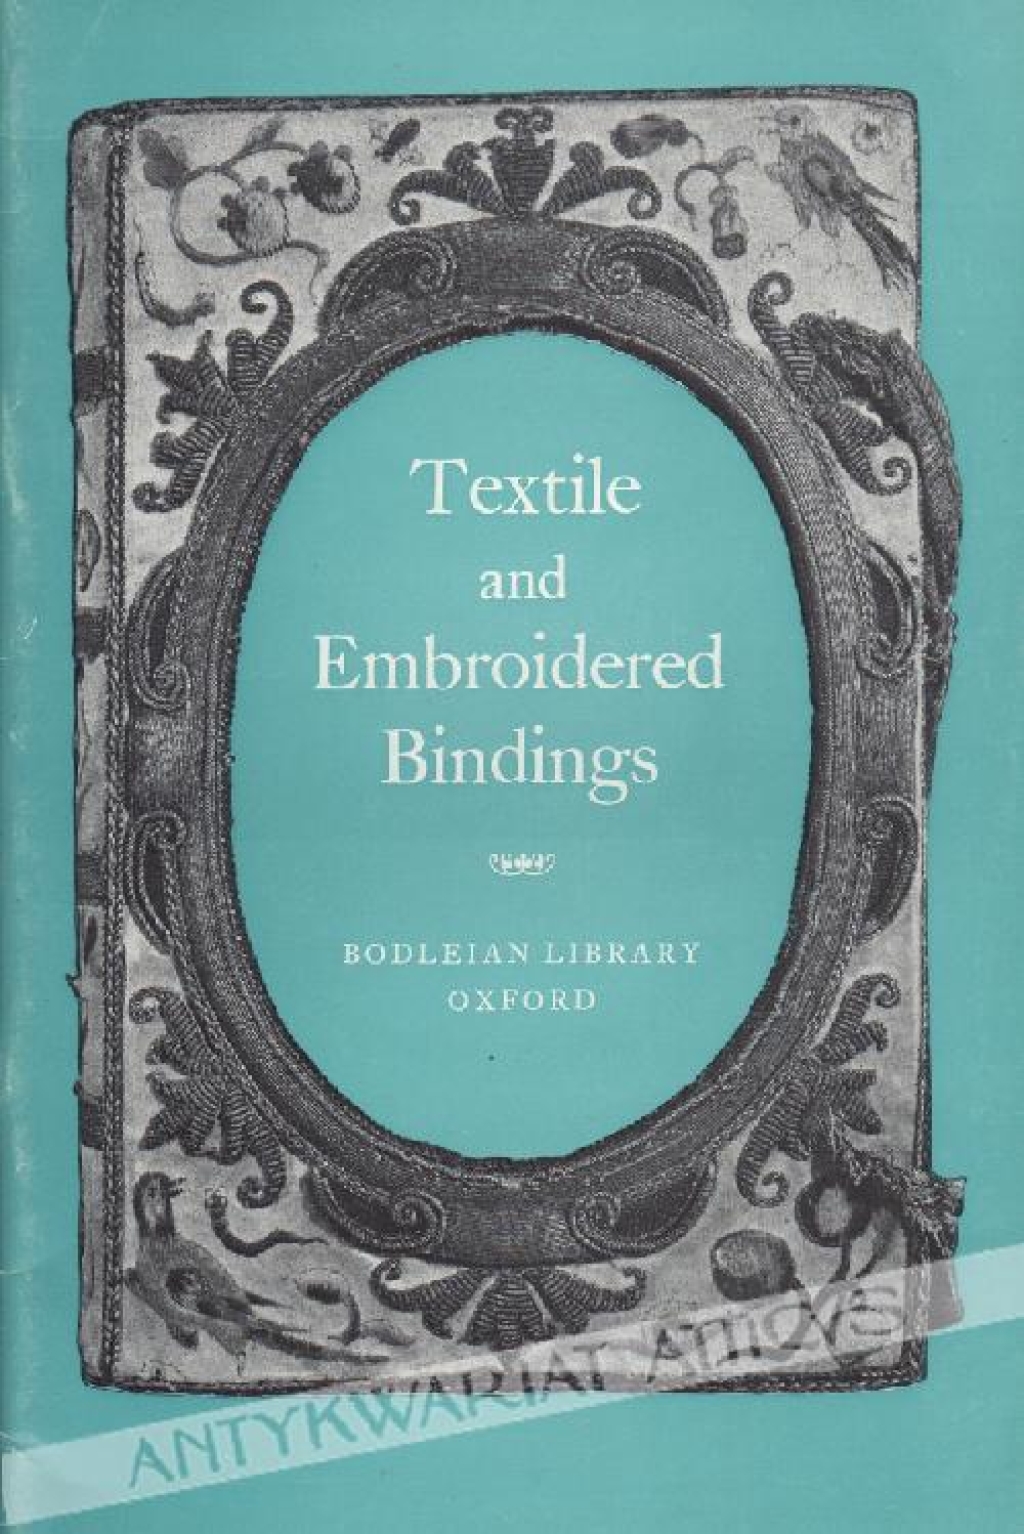 Textile and embroidered bindings